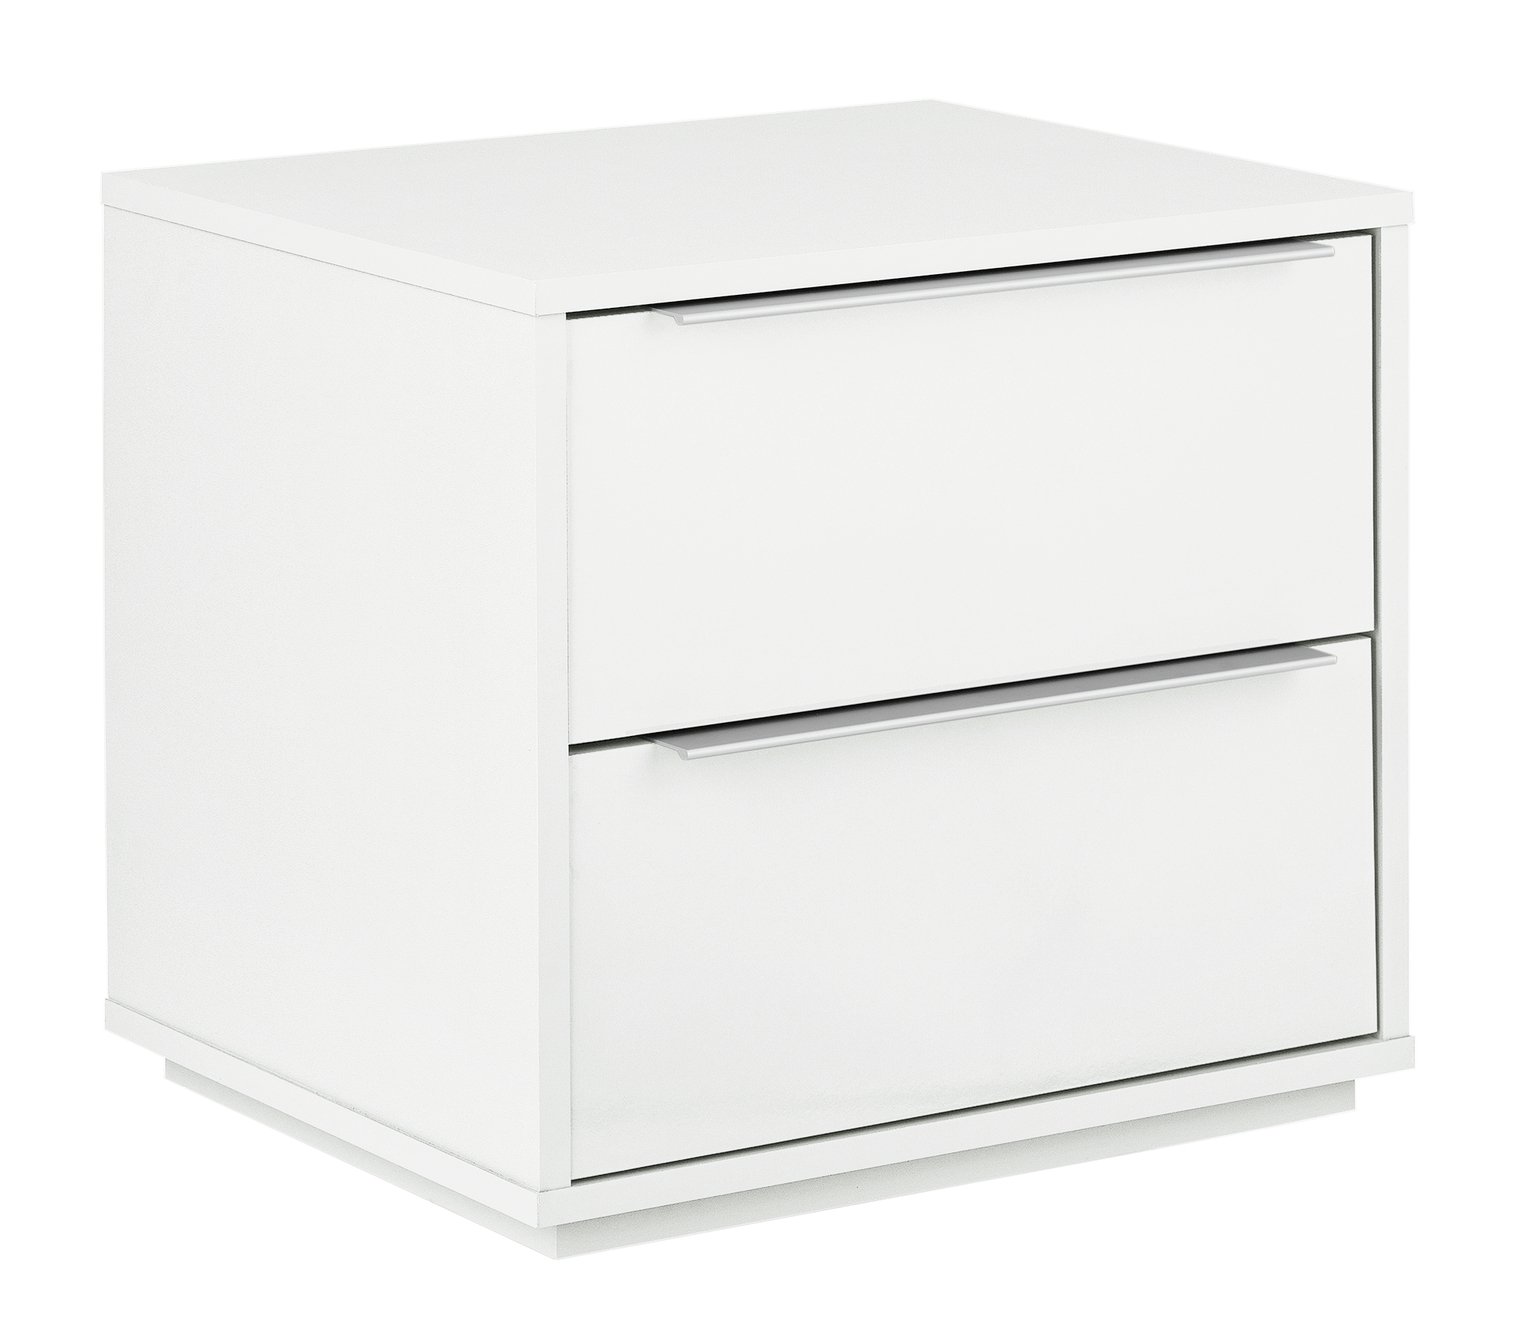 Argos Home Holsted 2 Drawer Bedside Table - White